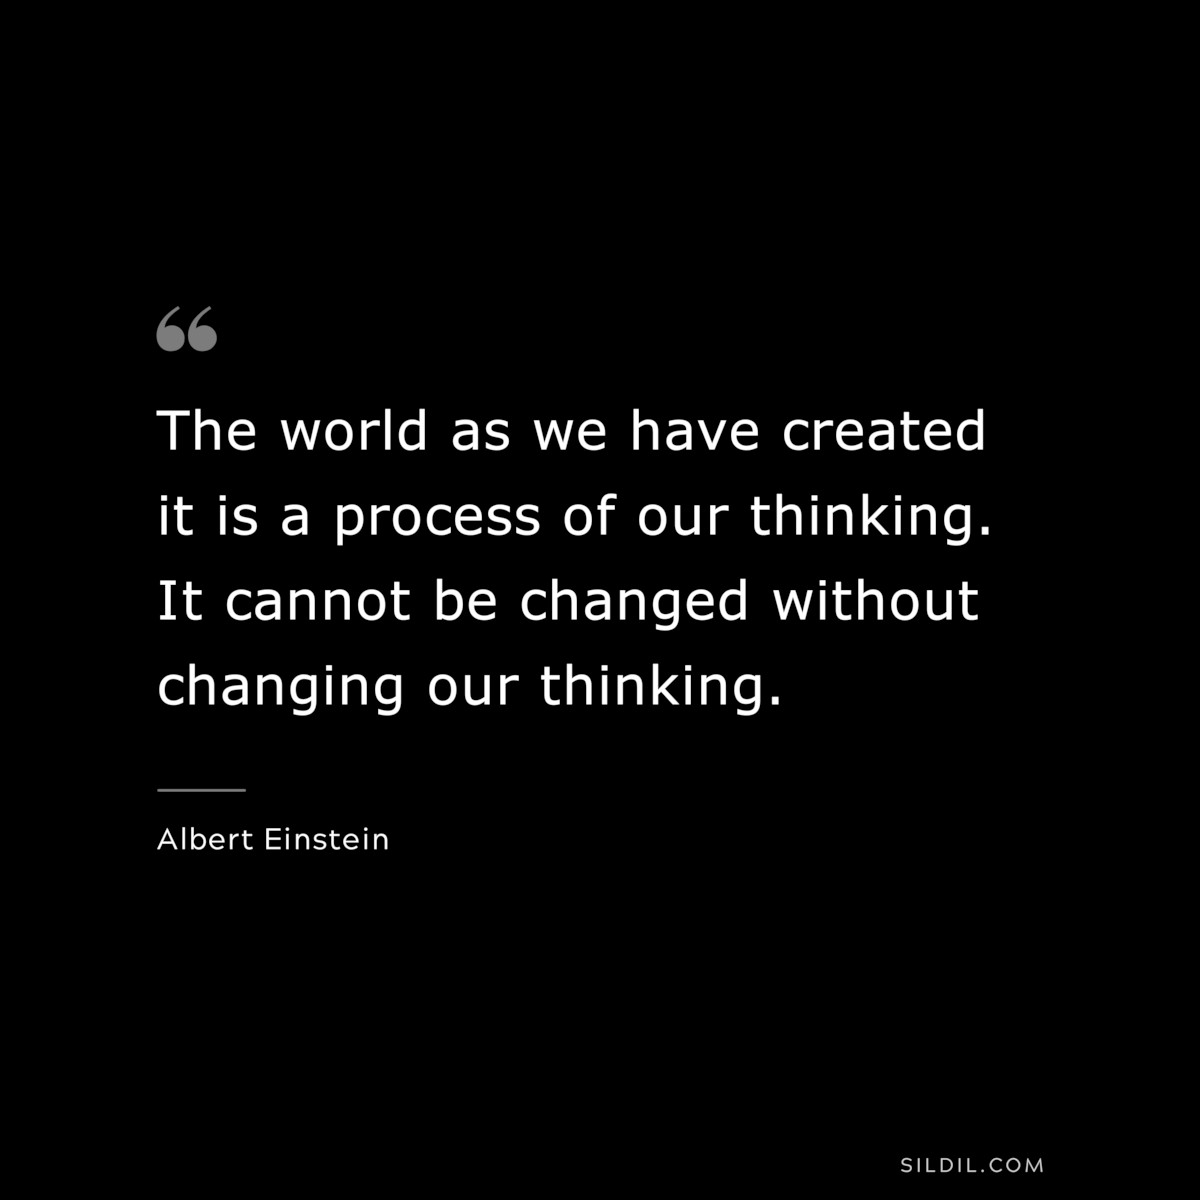 The world as we have created it is a process of our thinking. It cannot be changed without changing our thinking. ― Albert Einstein